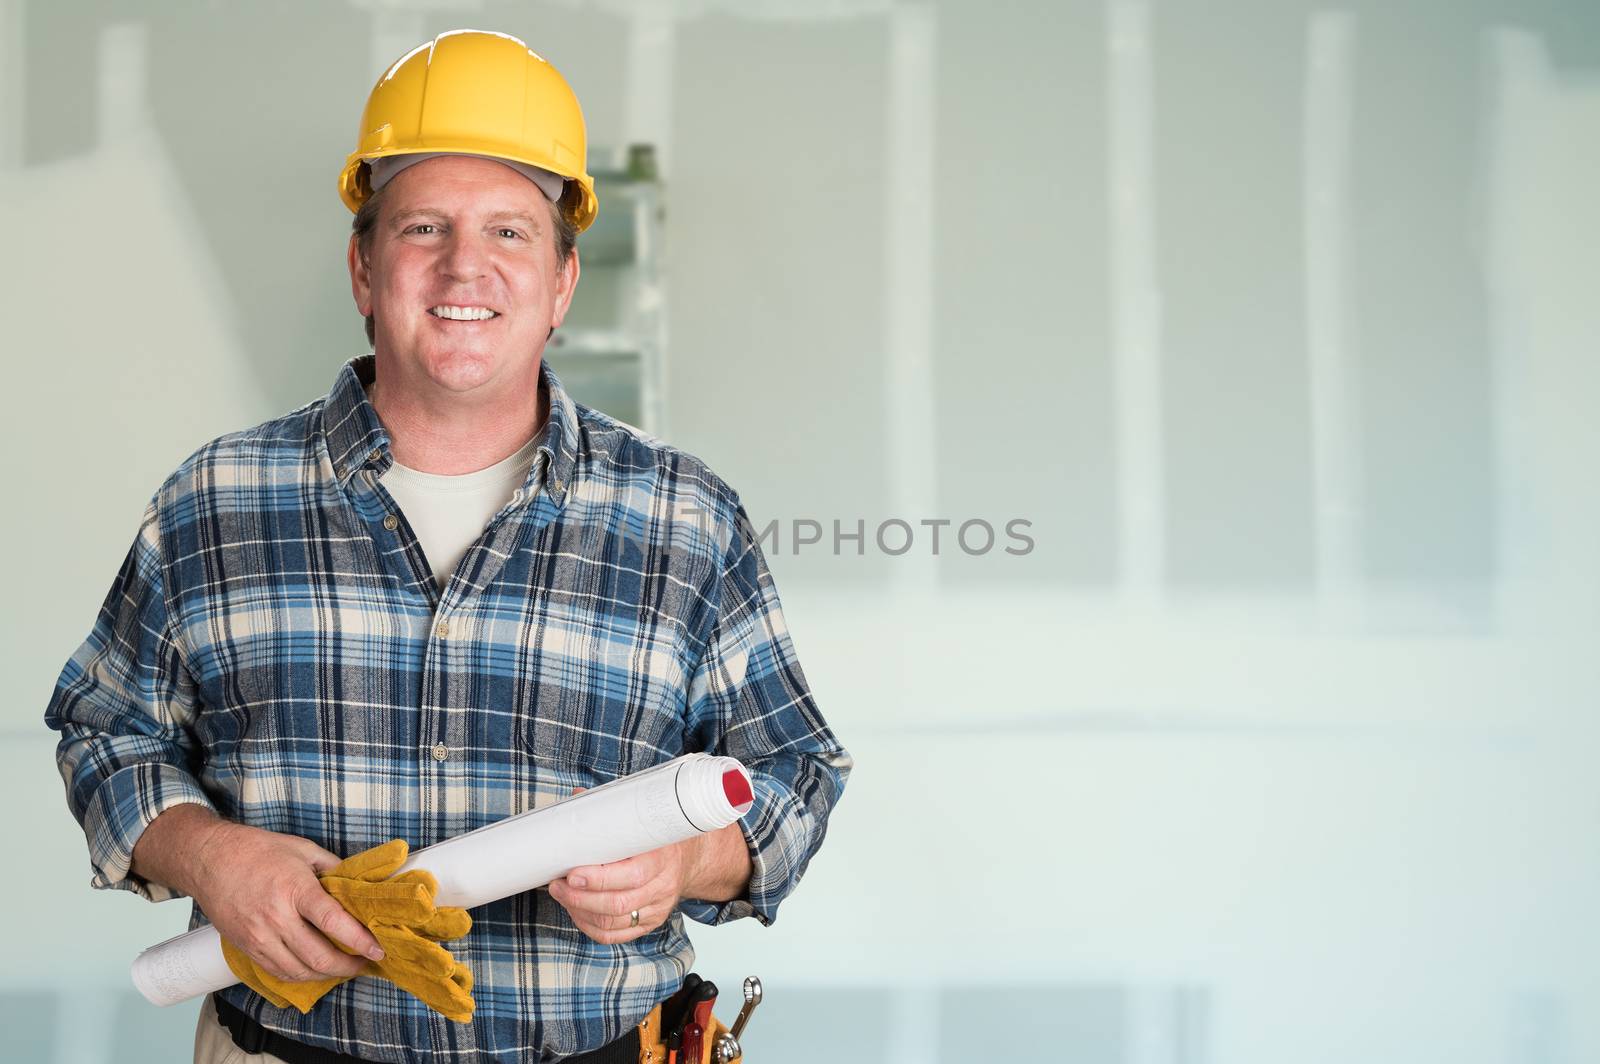 Contractor with Plans and Hard Hat In Front of Drywall. by Feverpitched